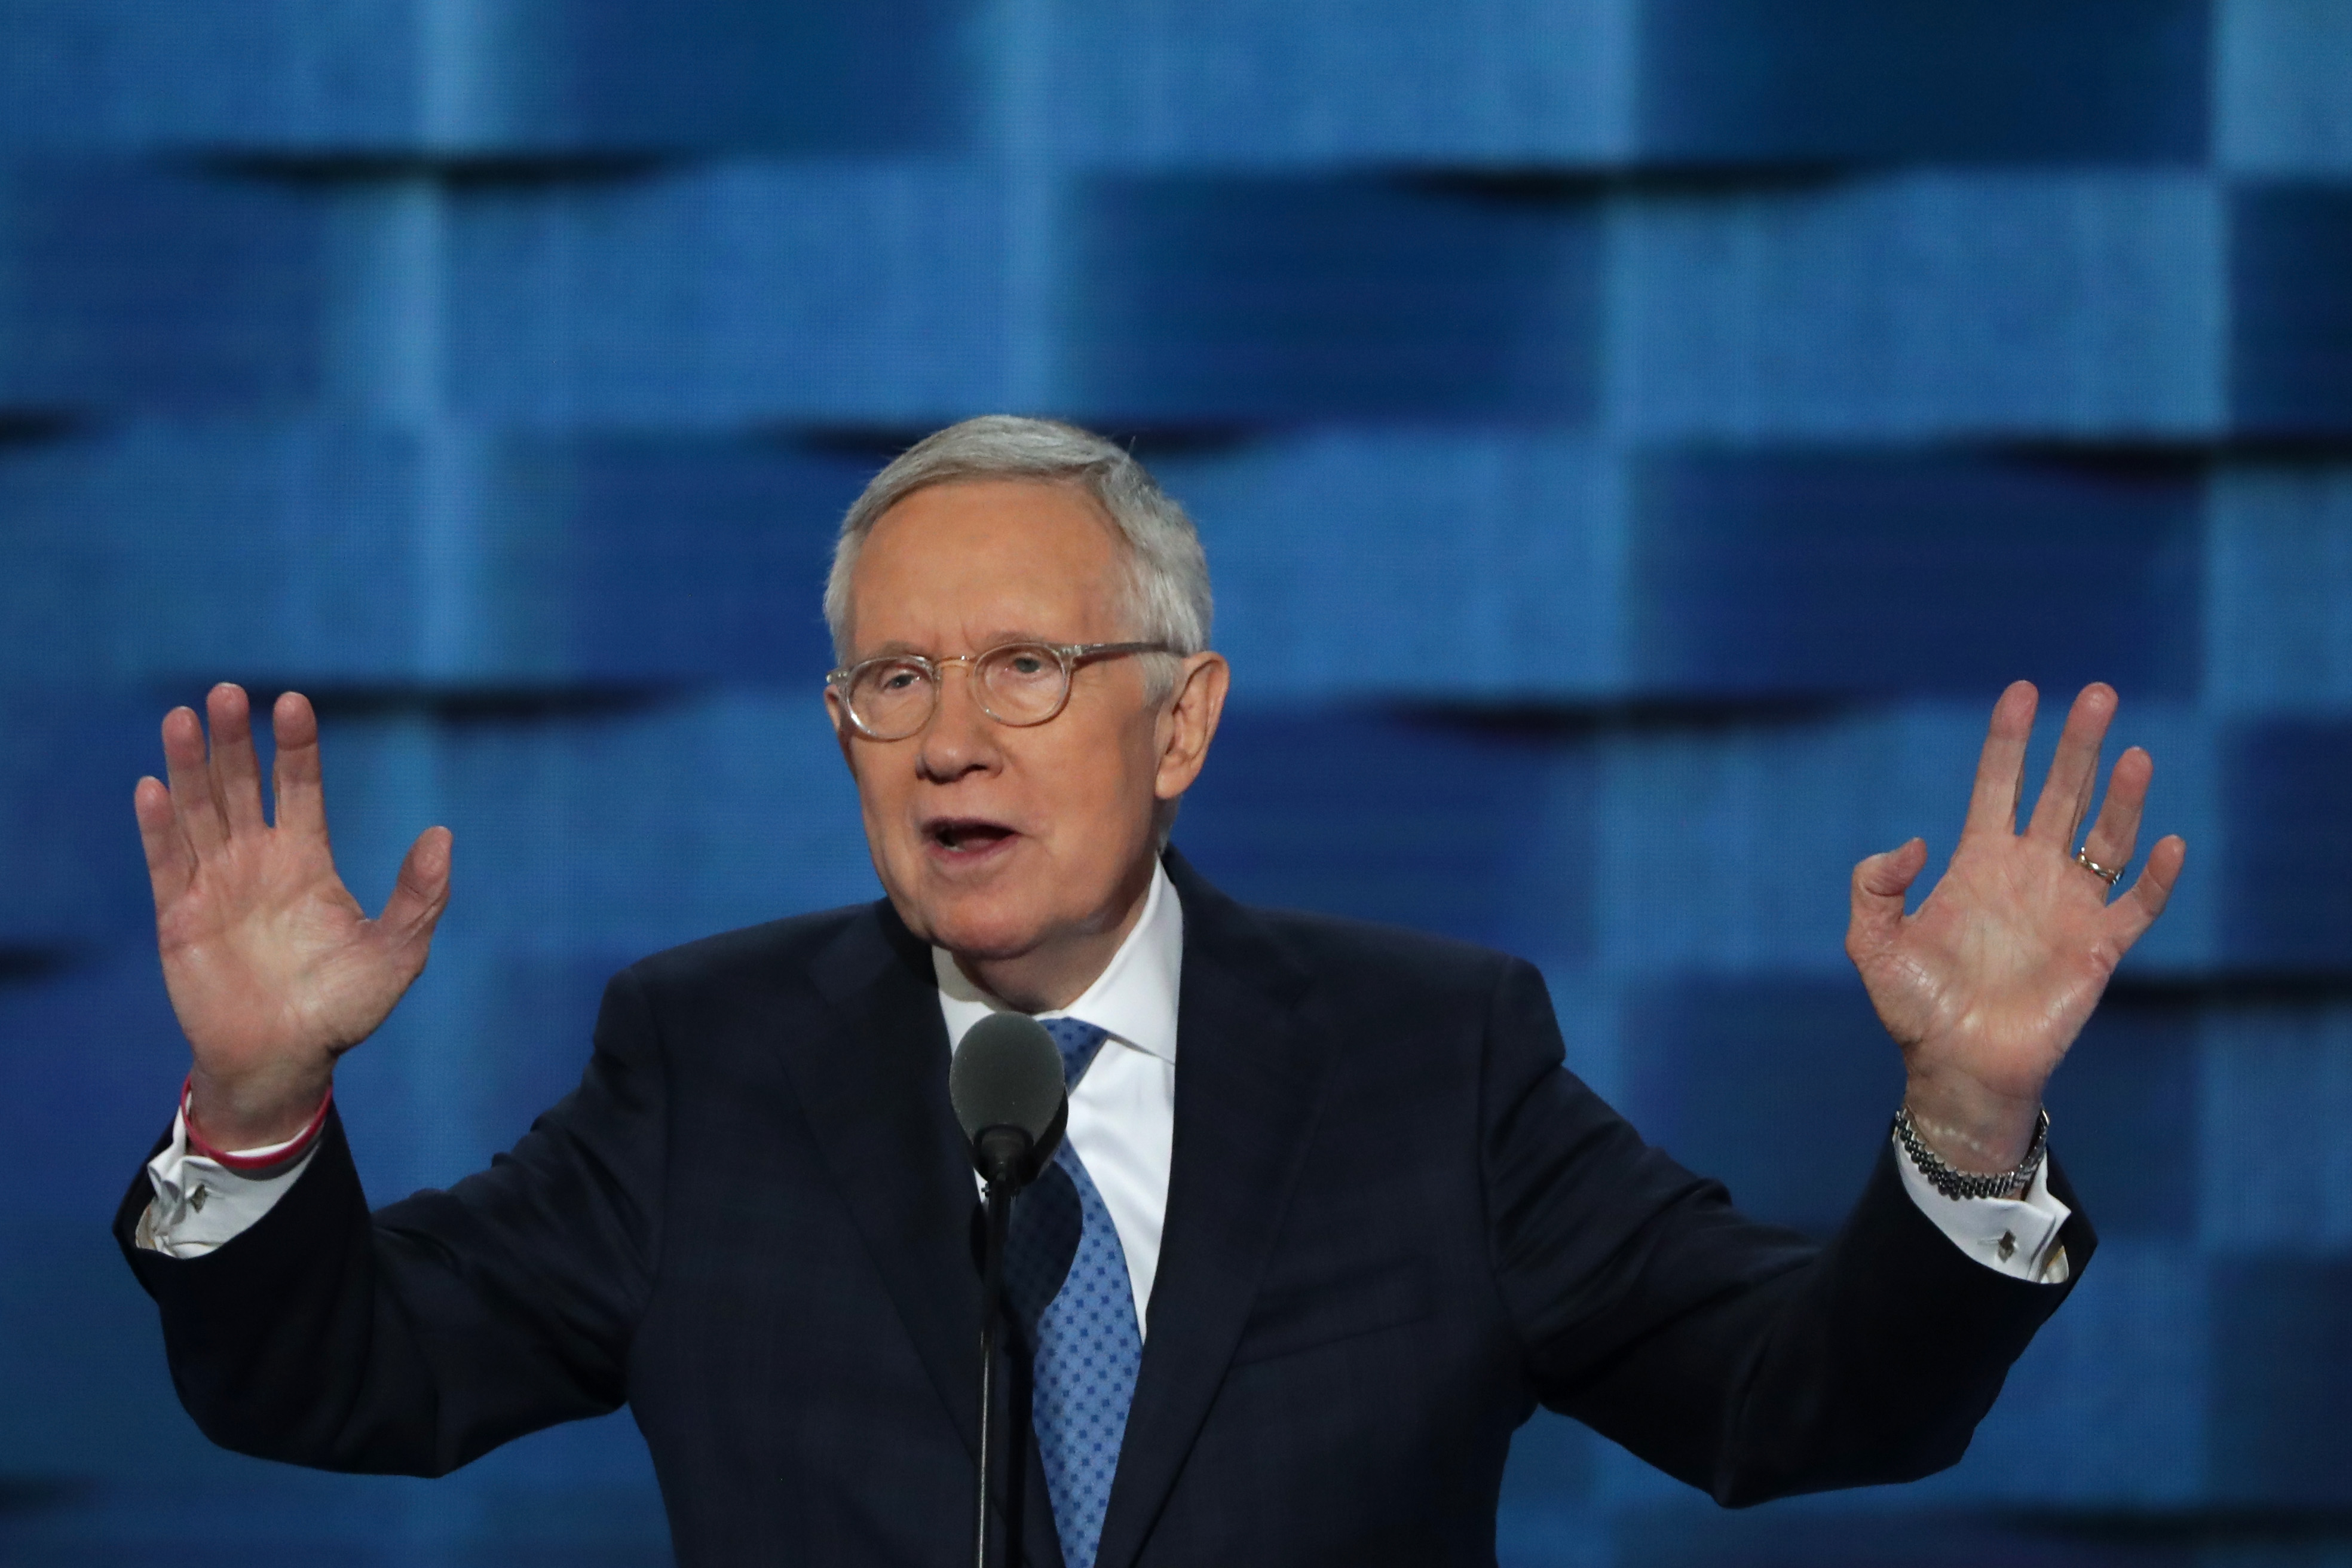 U.S. Sen. Minority Leader Sen. Harry Reid (D-NV) gestures to the crowd as he delivers remarks at the Democratic National Convention on July 27, 2016 in Philadelphia, Pennsylvania. (Alex Wong/Getty Images)